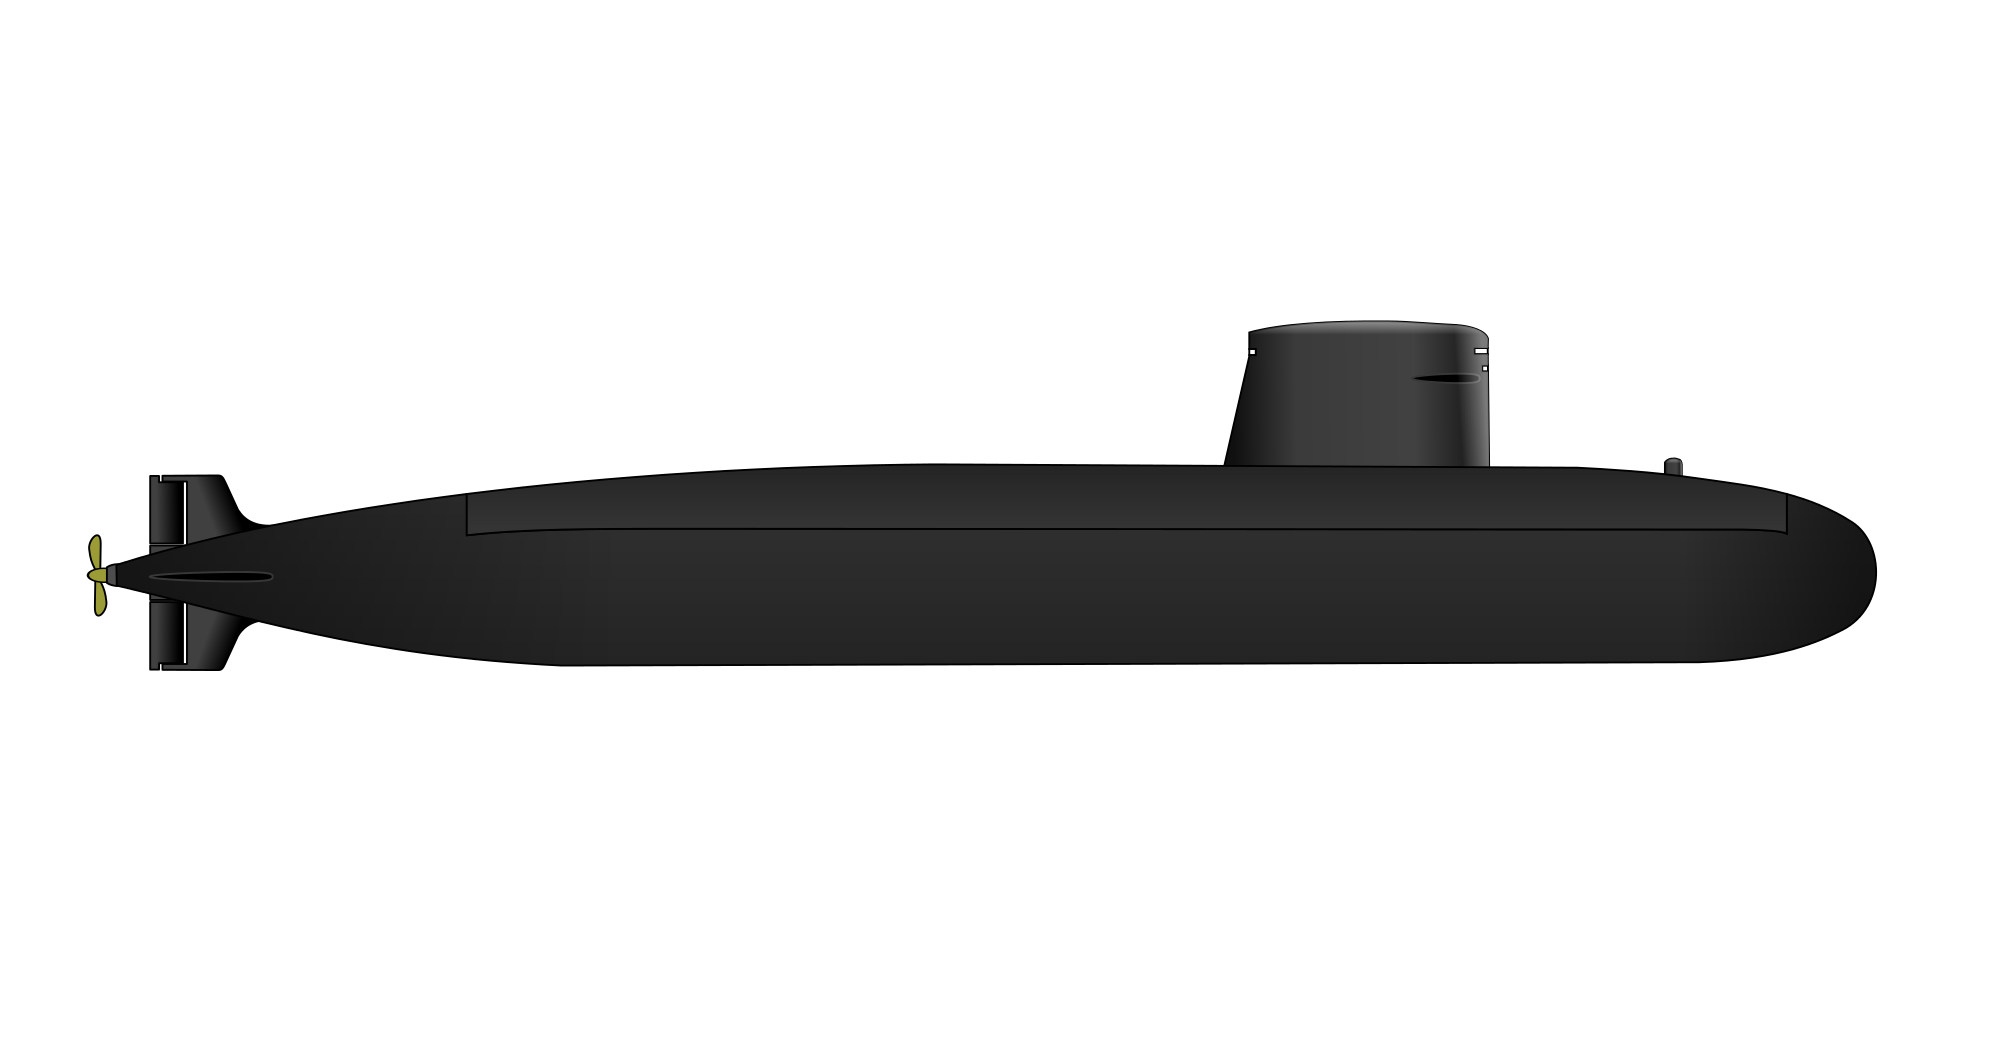 Submarine svg #19, Download drawings